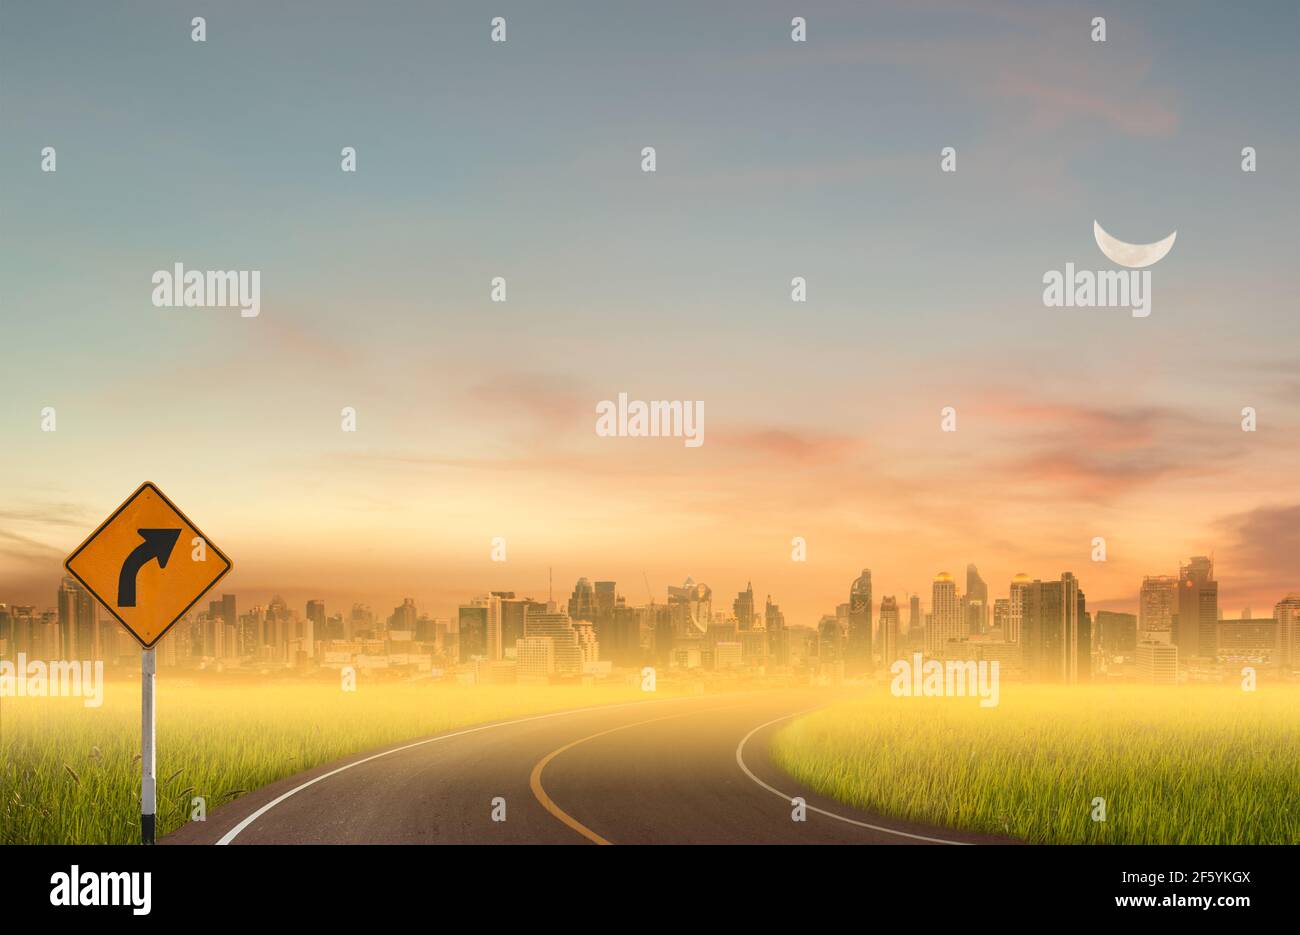 Sign curved road on the way at the natural sunset over field or meadow with moon and city background. Stock Photo